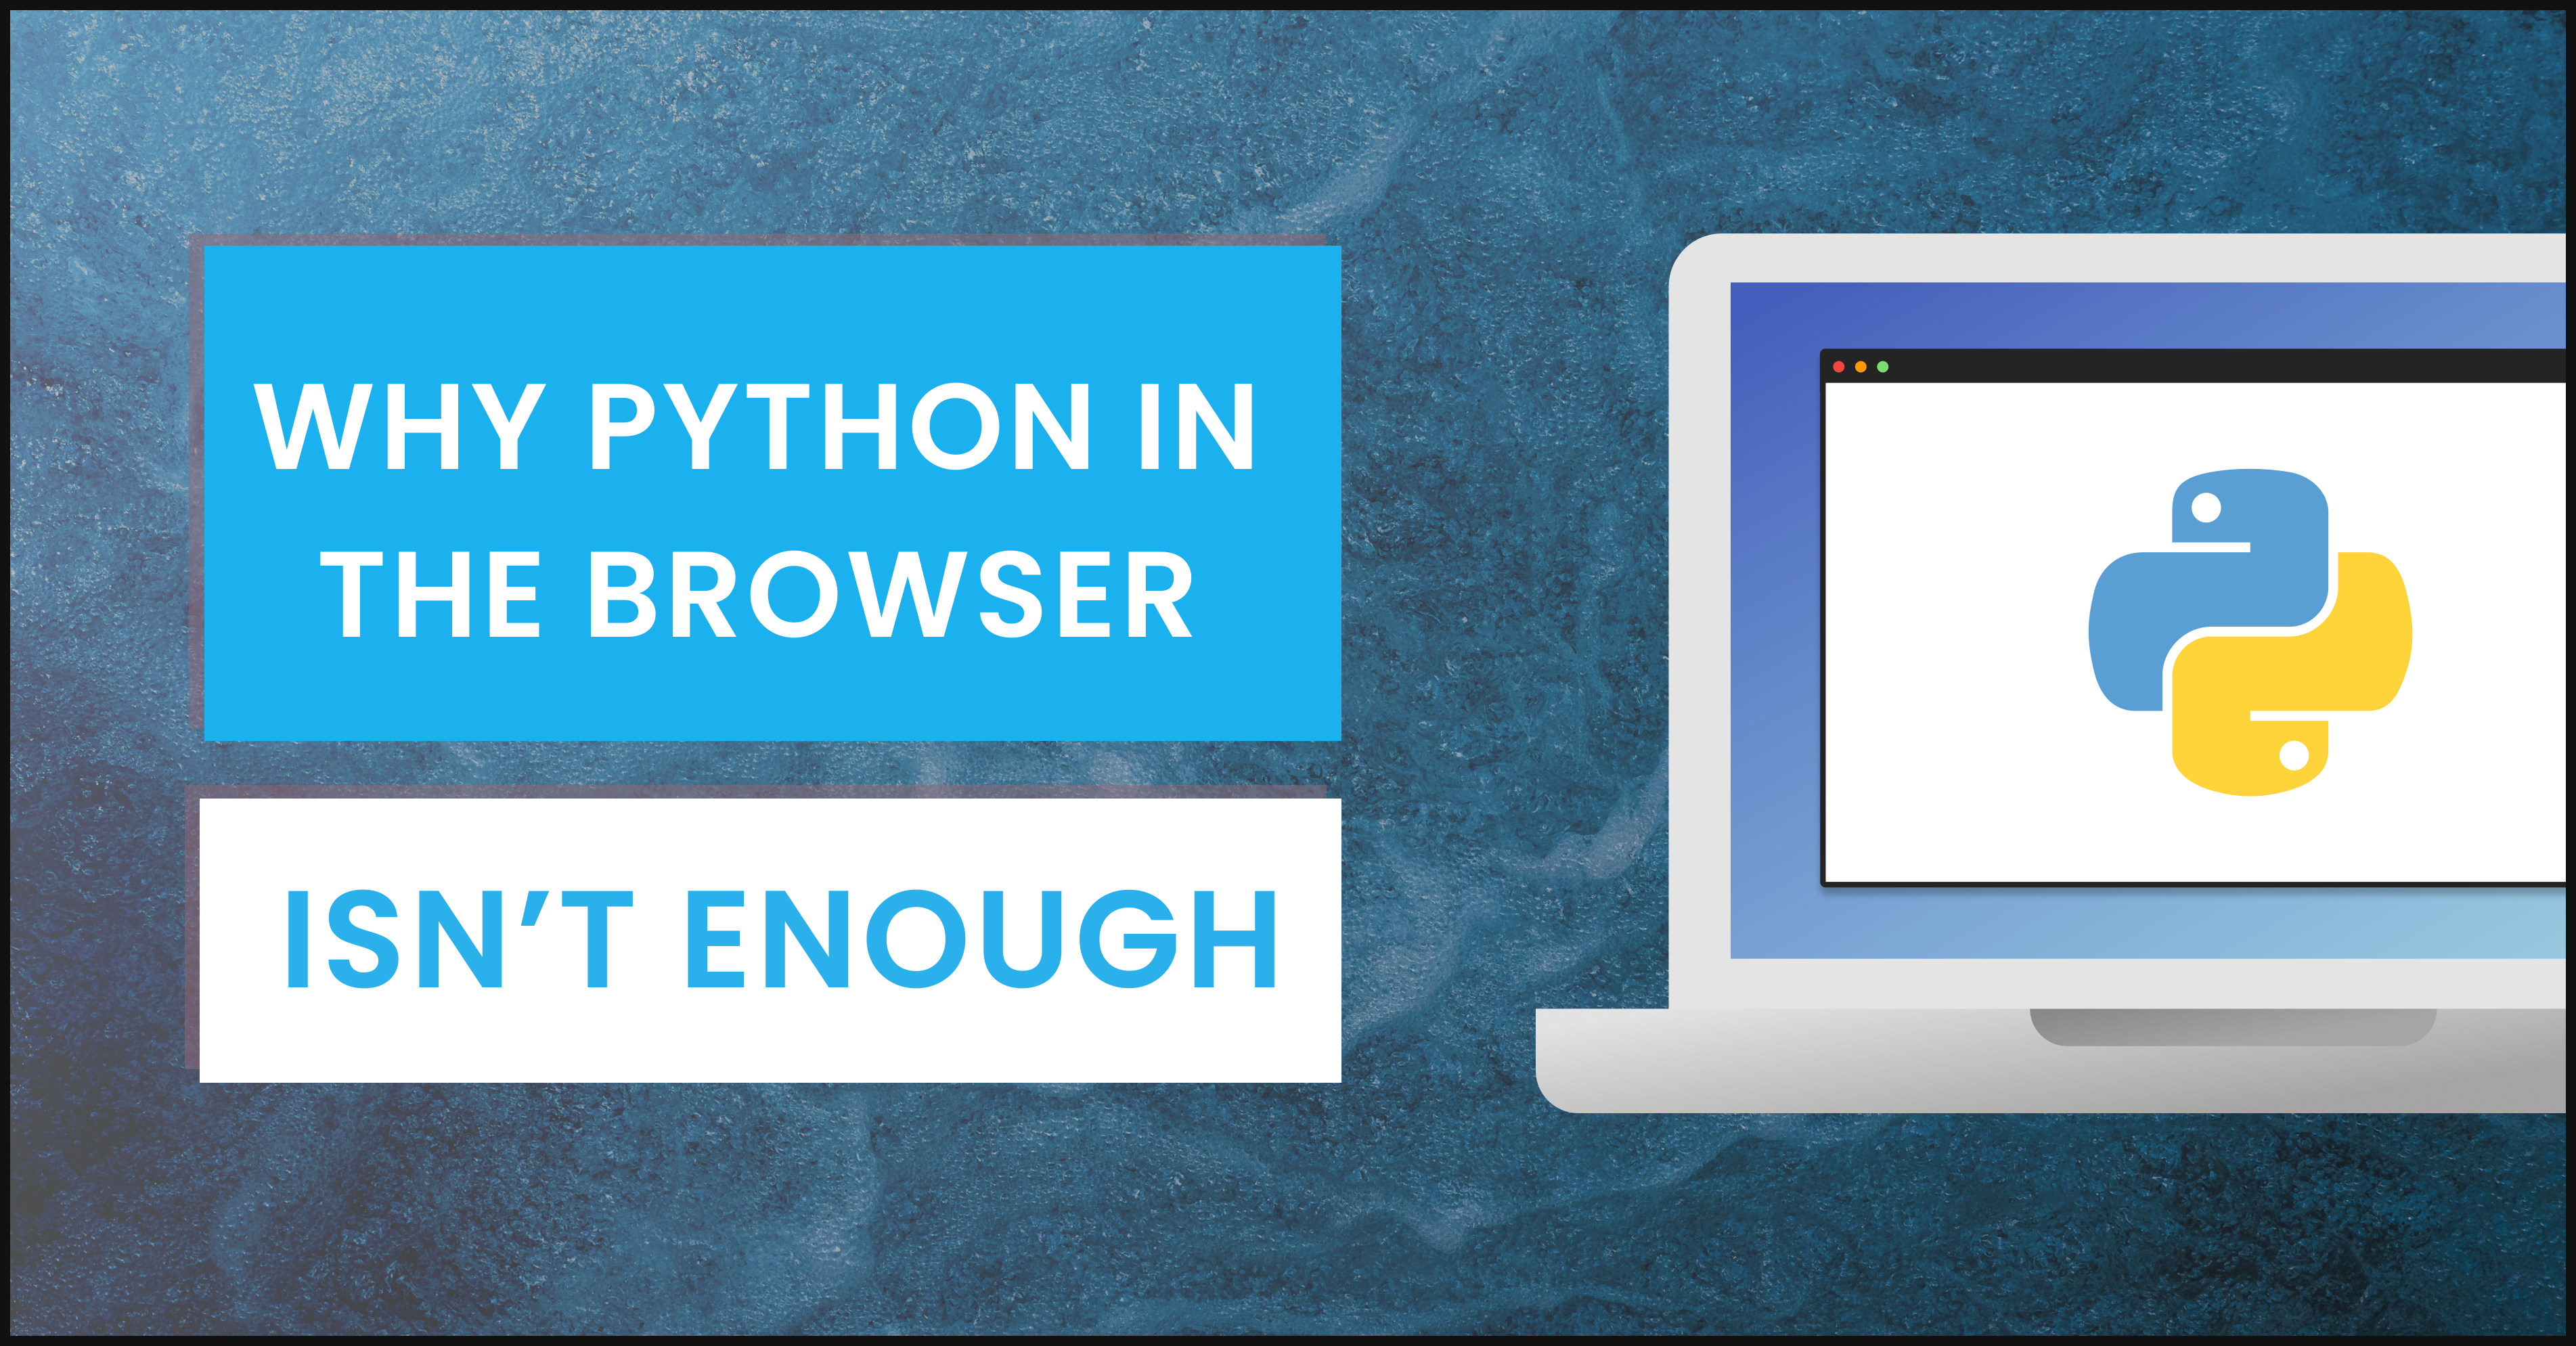 Hanging out in the Python community, you’ll see periodic waves of excitement about Python in the browser. “Finally,” we think, “we can cast of